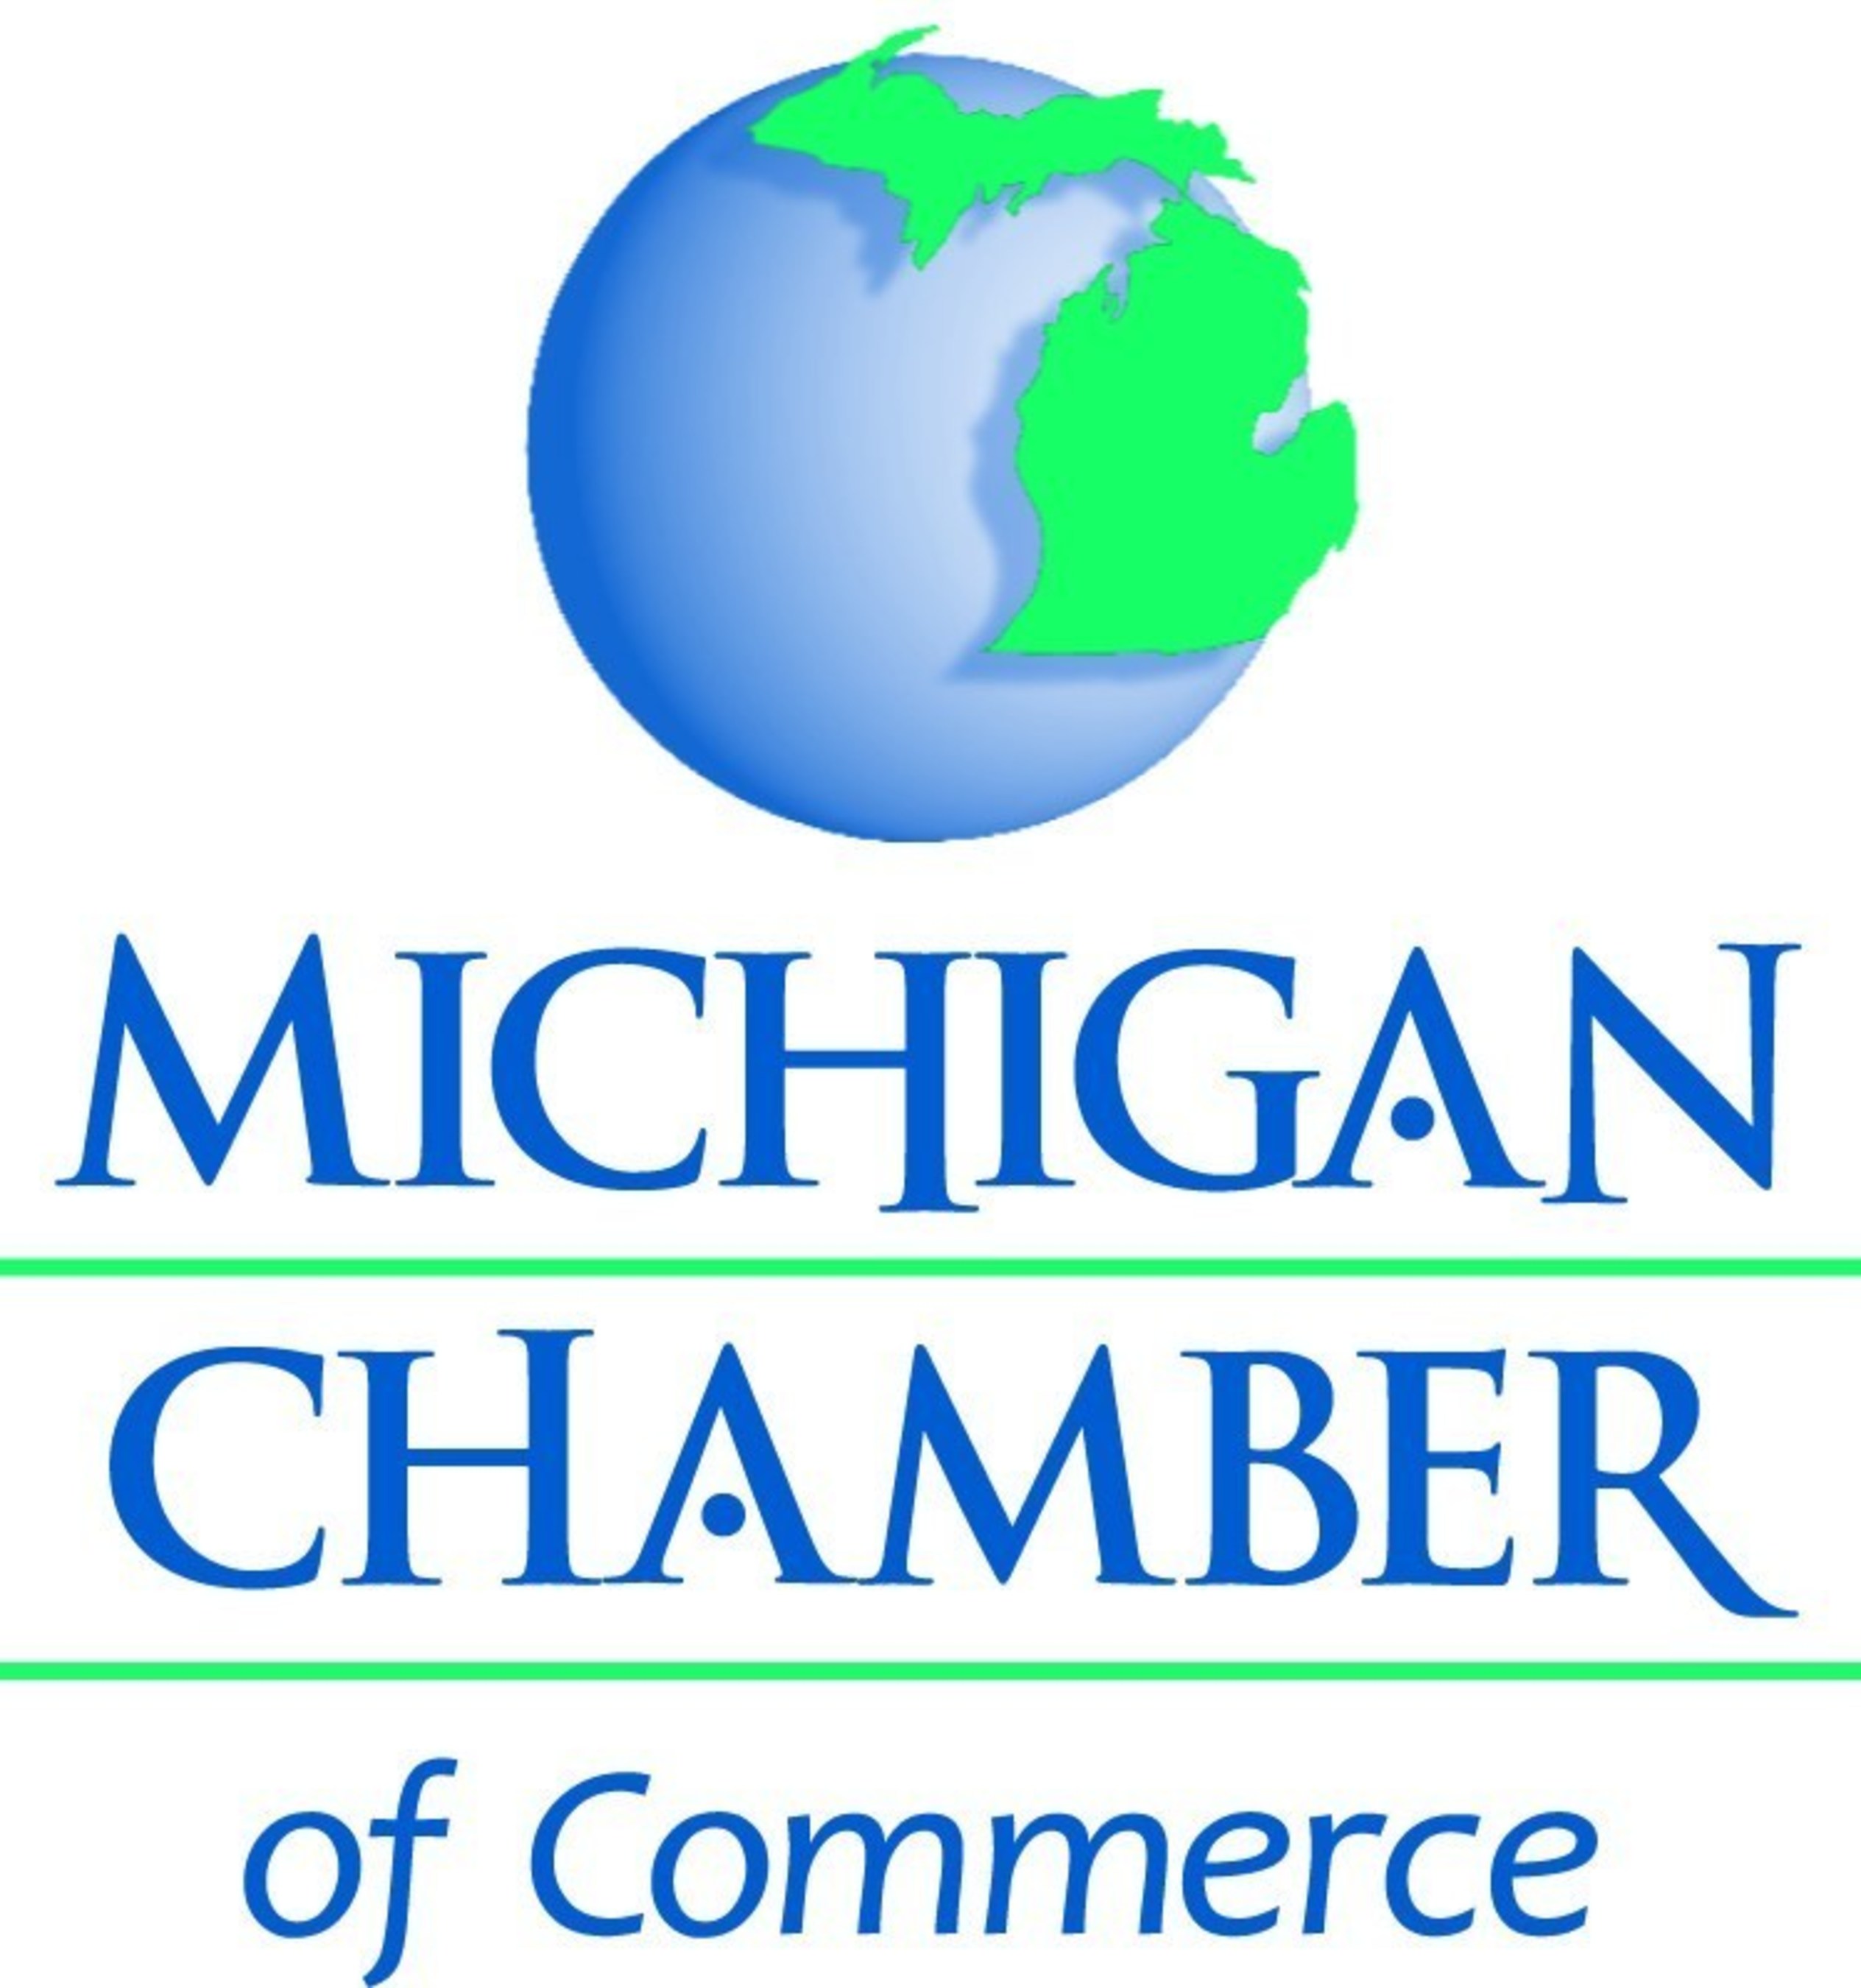 The Michigan Chamber of Commerce is a statewide business organization representing approximately 6,600 employers, trade associations and local chambers of commerce. The Michigan Chamber represents businesses of every size and type in all 83 counties of the state. The Michigan Chamber was established in 1959 to be an advocate for Michigan's job providers in the legislative, political and legal process.